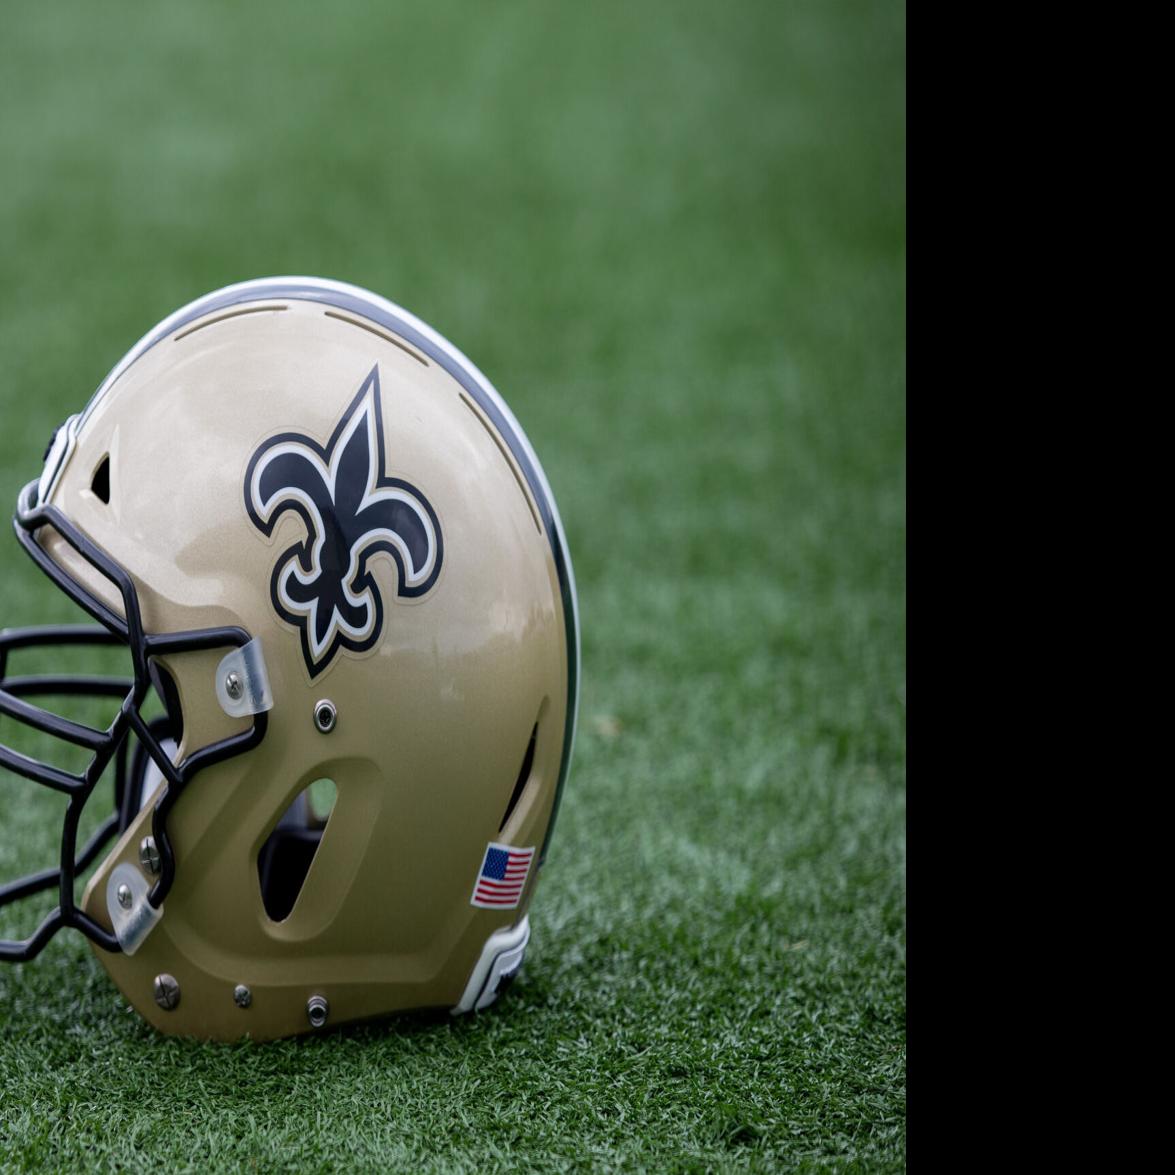 Report: Saints Among Teams Who Opposed TNF Flex Scheduling